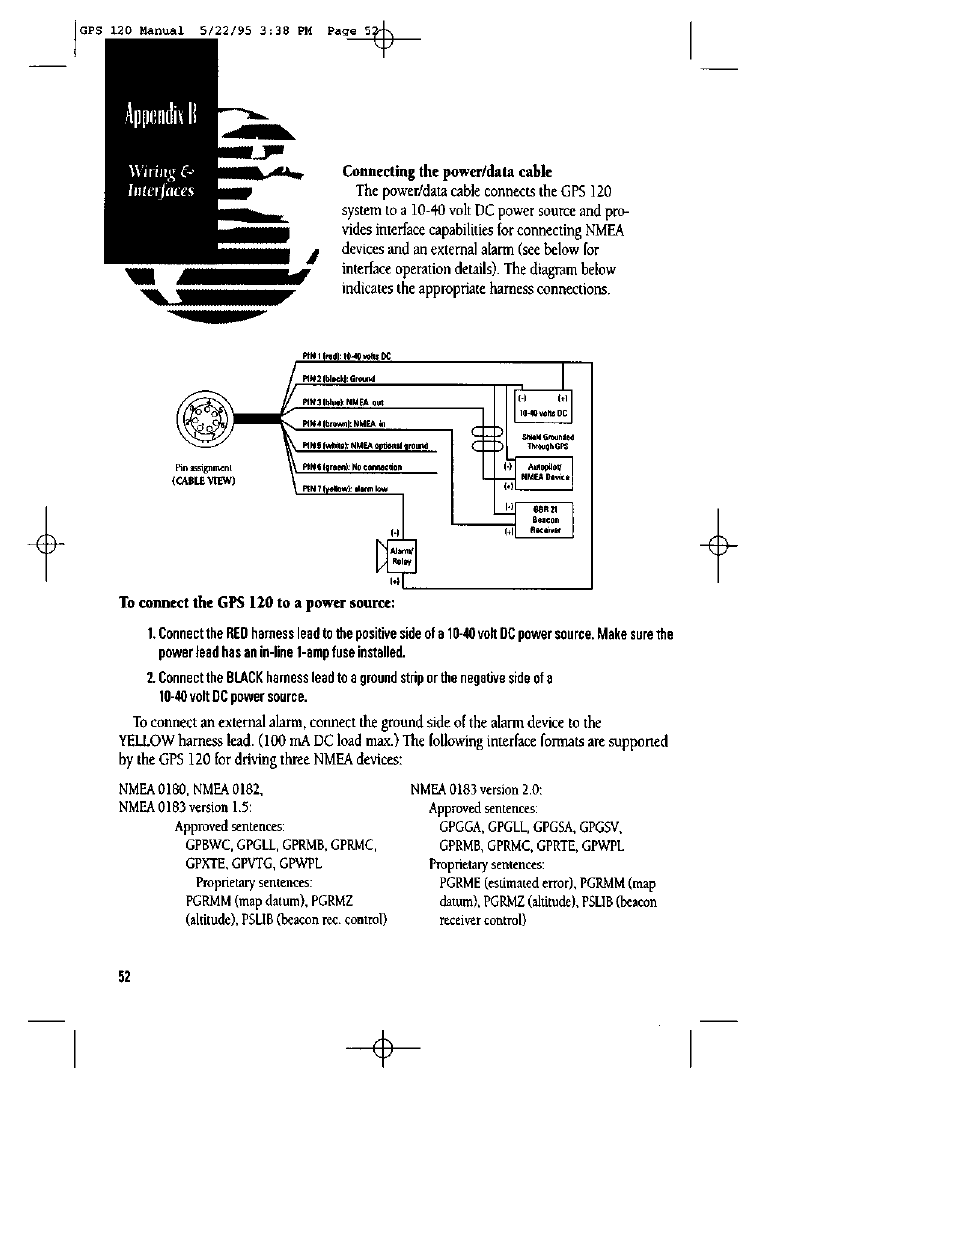 Connecting the power/data cable | Garmin GPS 120 User Manual | Page 60 / 71